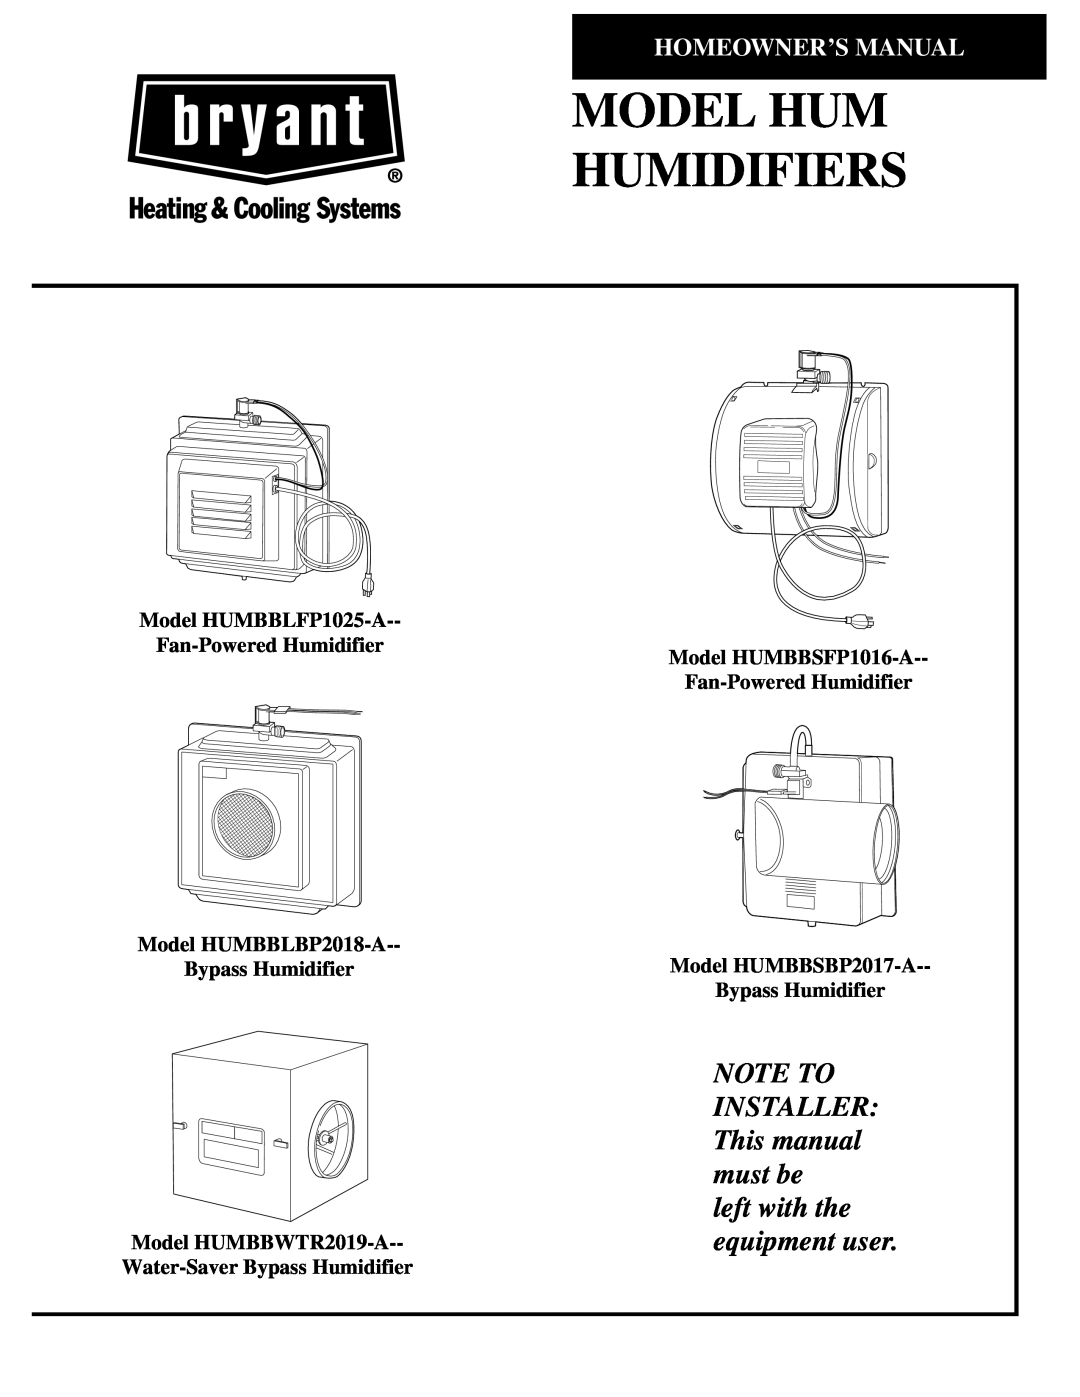 Bryant HUMBBSFP1016, HUMBBWTR2019 owner manual Model Hum Humidifiers, NOTE TO INSTALLER This manual must be left with the 